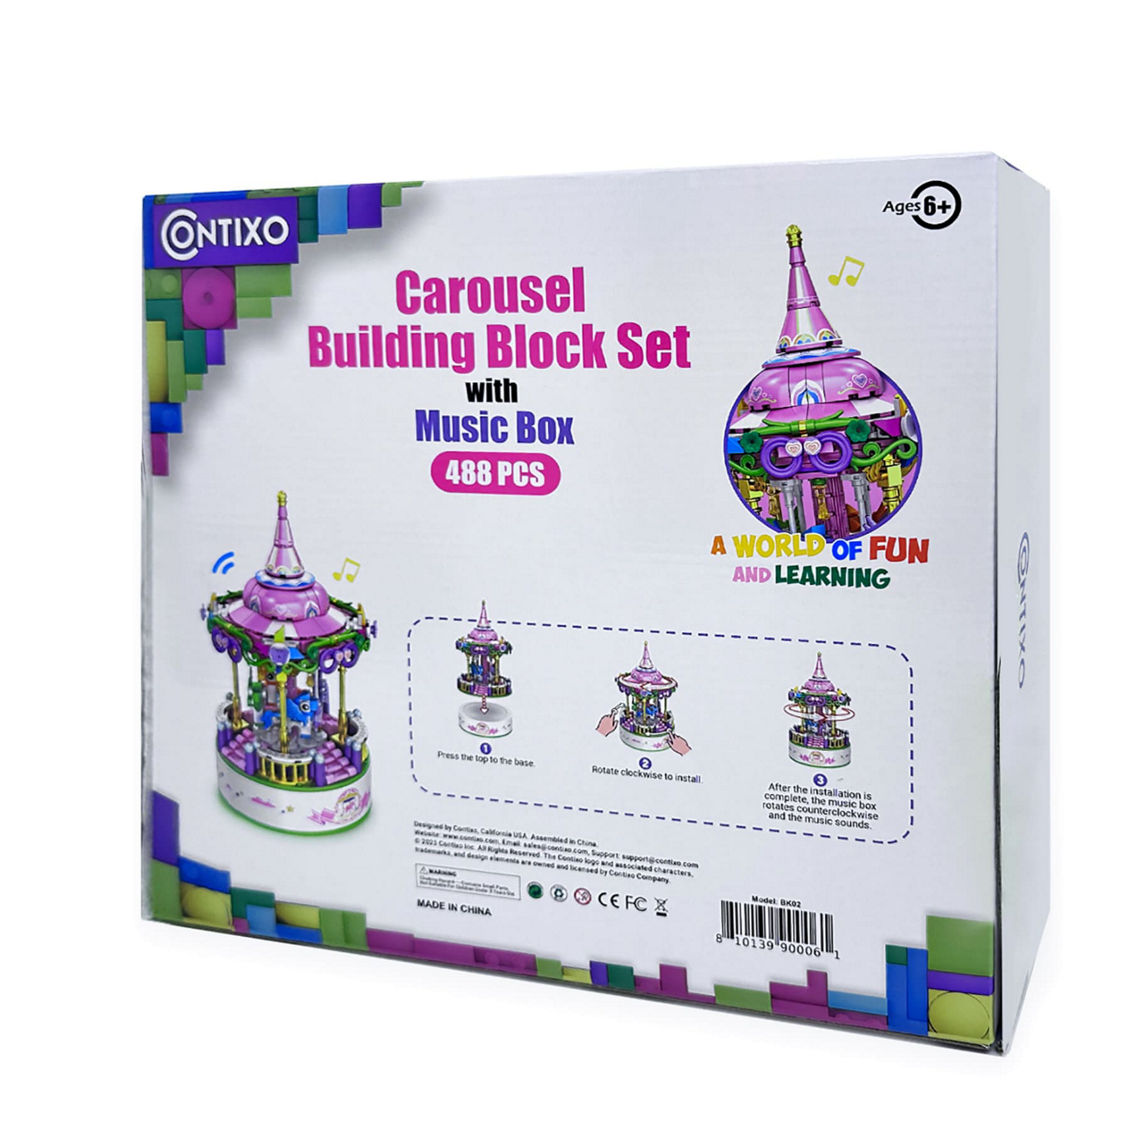 Contixo BK02 Carousel Building Block Set with Music Box, 488 Pieces - Image 3 of 5